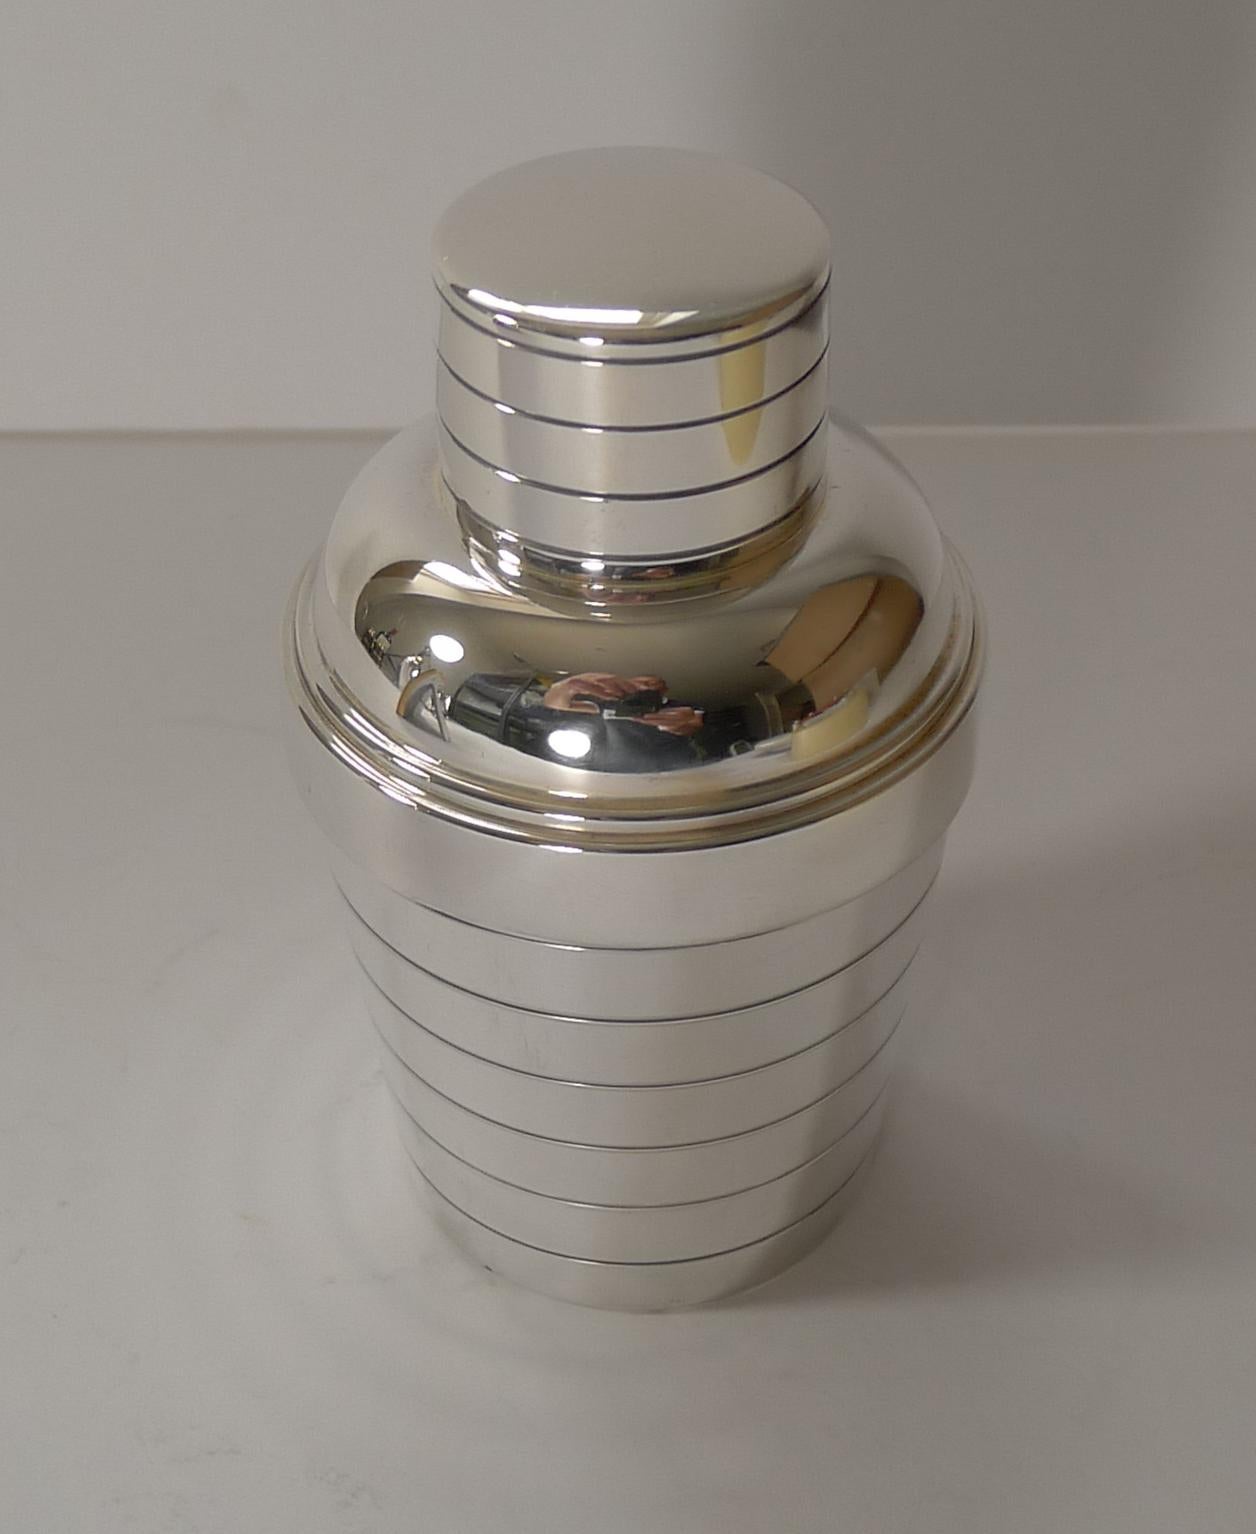 A fabulous and scarce little French individual cocktail shaker made in silver plate. The top section once removed, reveals an integral lemon squeezer or reamer which can sit upside down on the base and the juice of lemons or limes squeezed directly